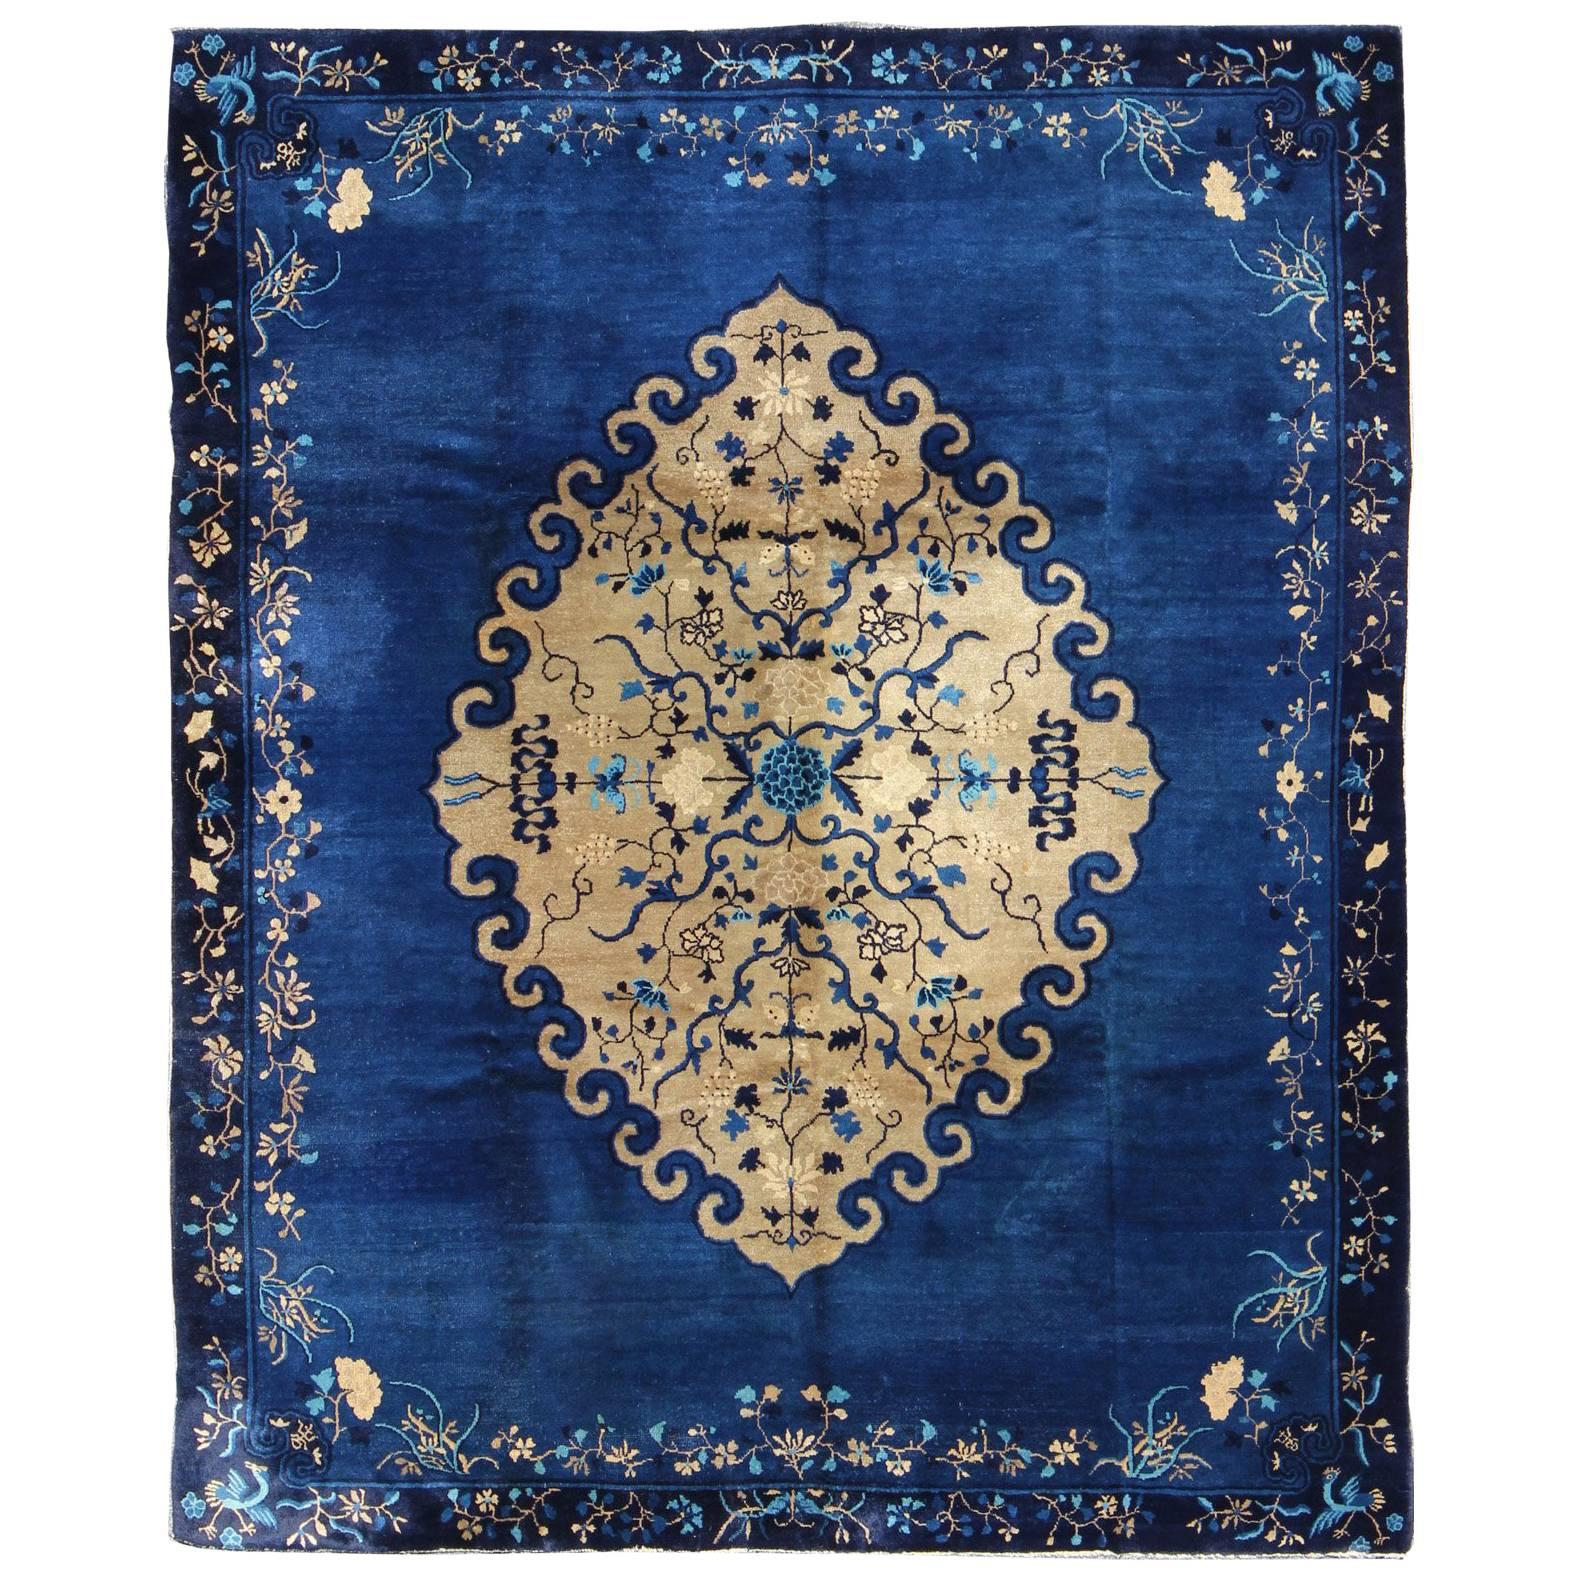 Antique Chinese Peking Rug in Royal Blue and Golden Camel Medallion